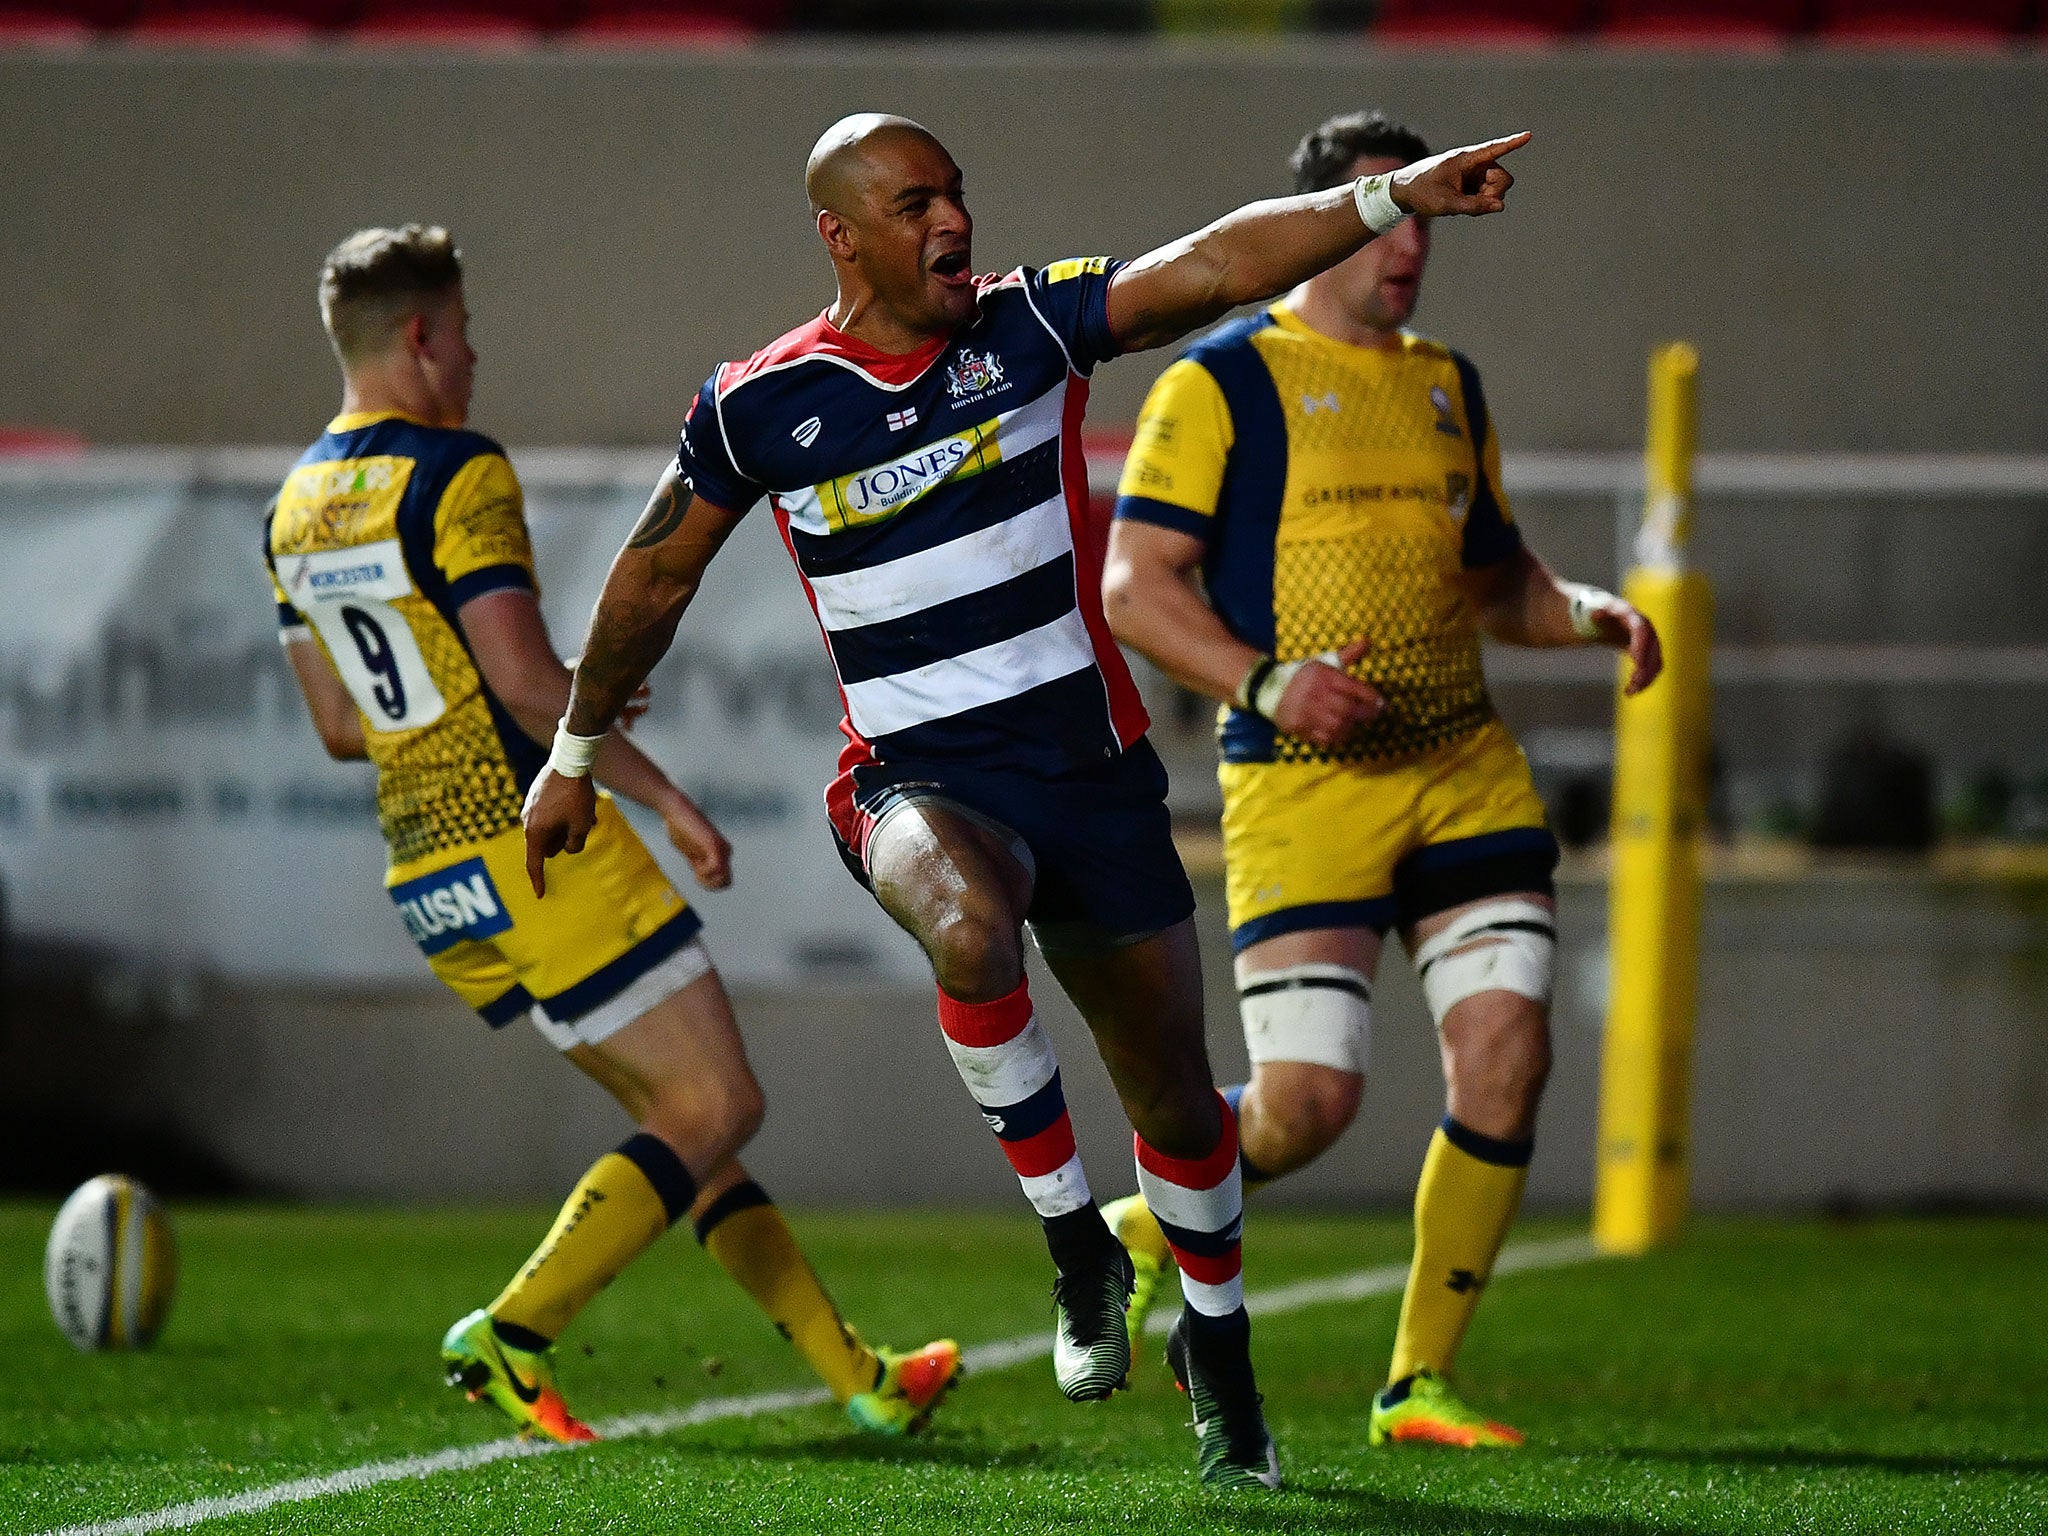 Varndell is now only one behind Mark Cueto, the Premiership's all-time record try scorer